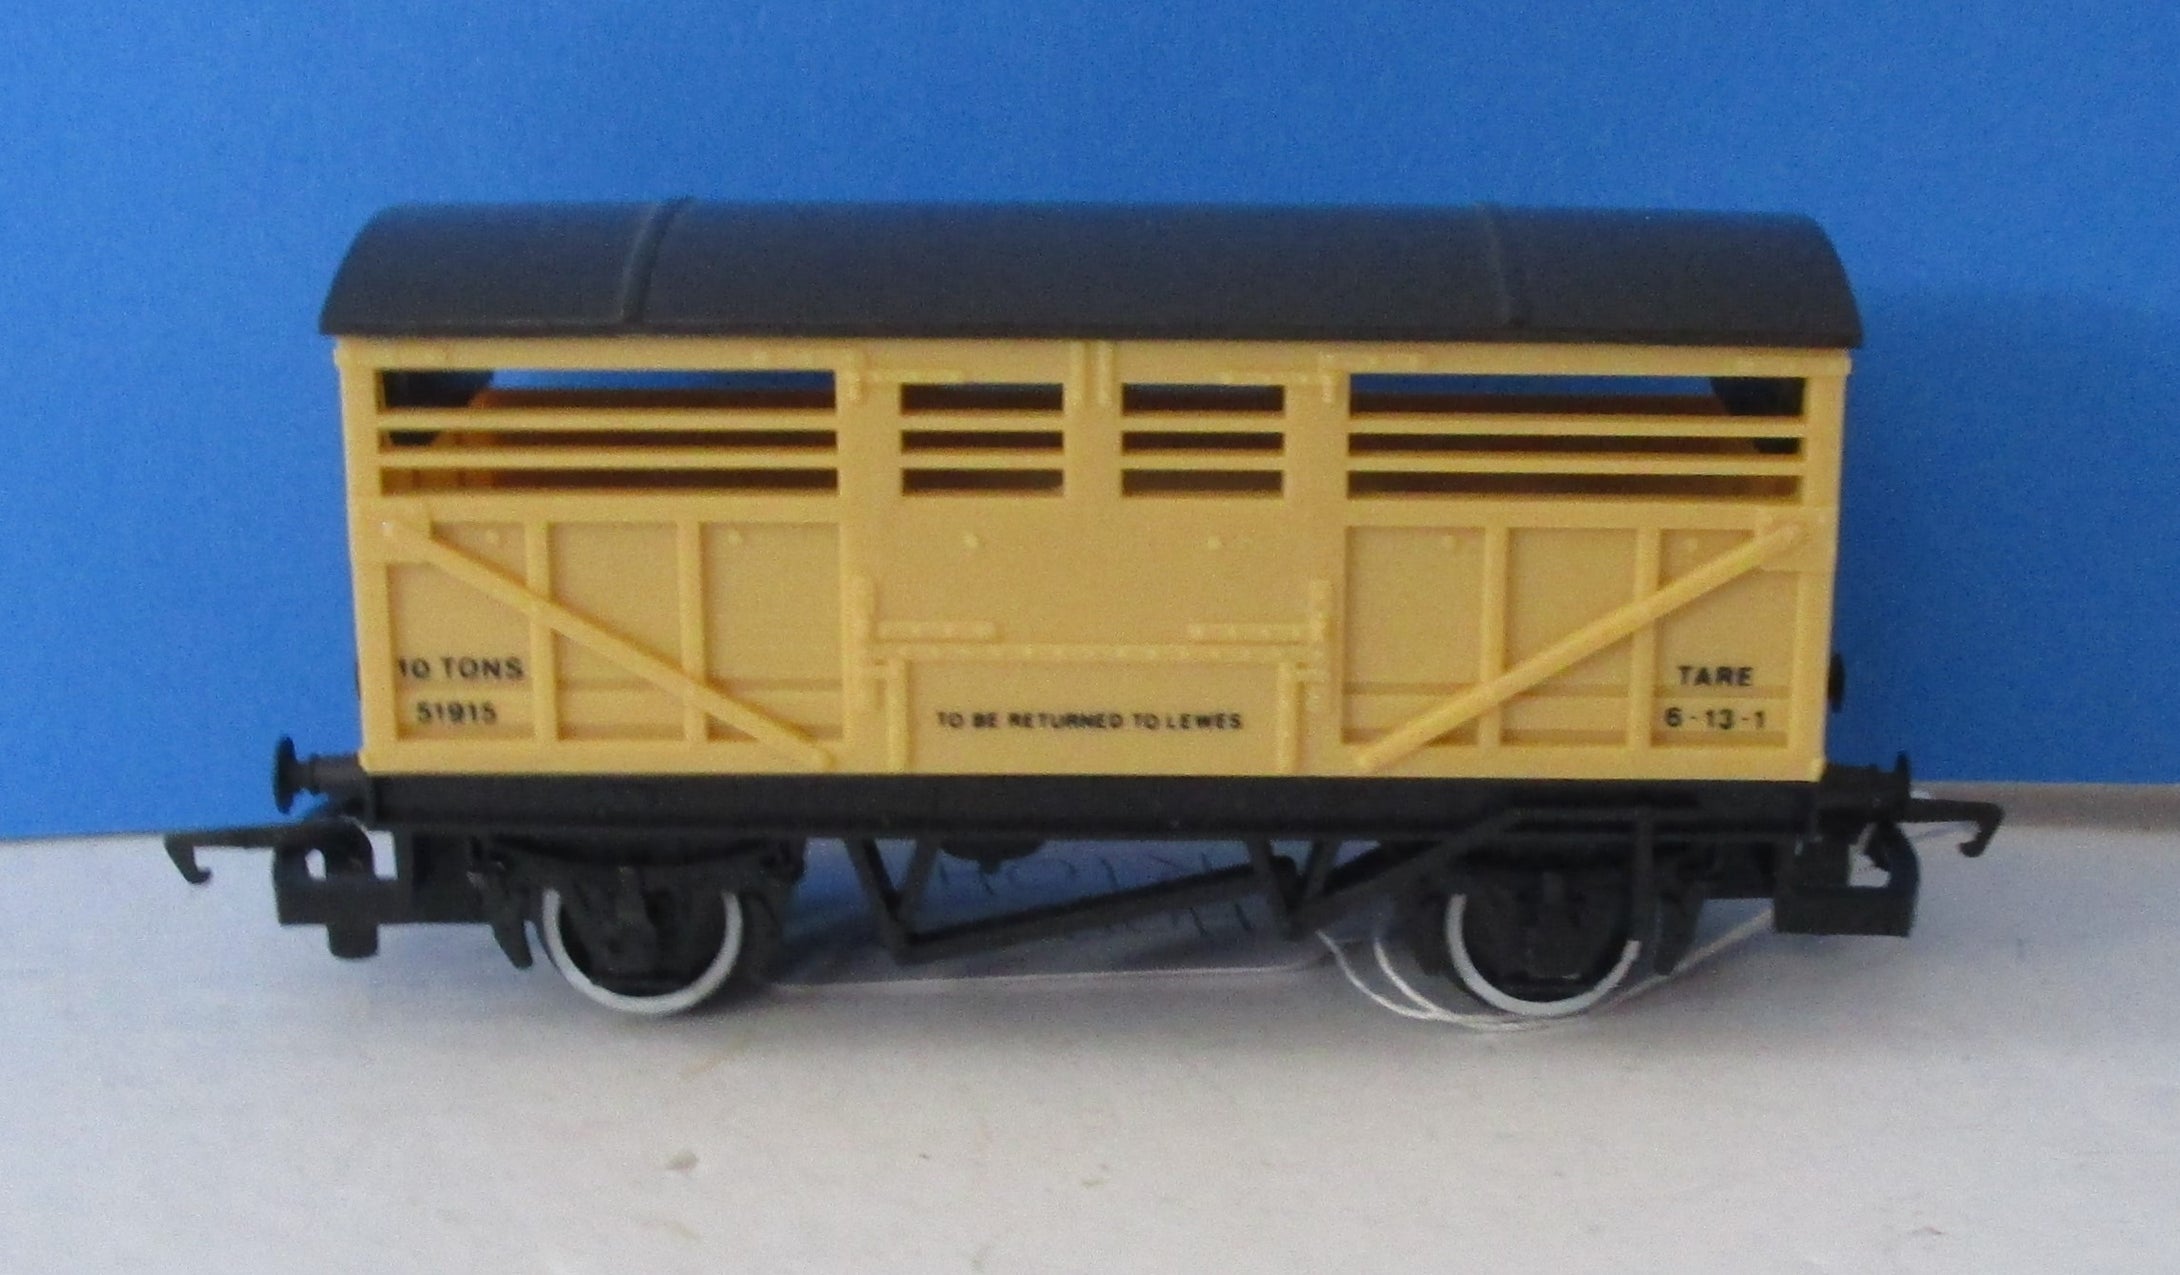 R104 HORNBY Beige 10 Ton sheep/cattle wagon 51915 - UNBOXED